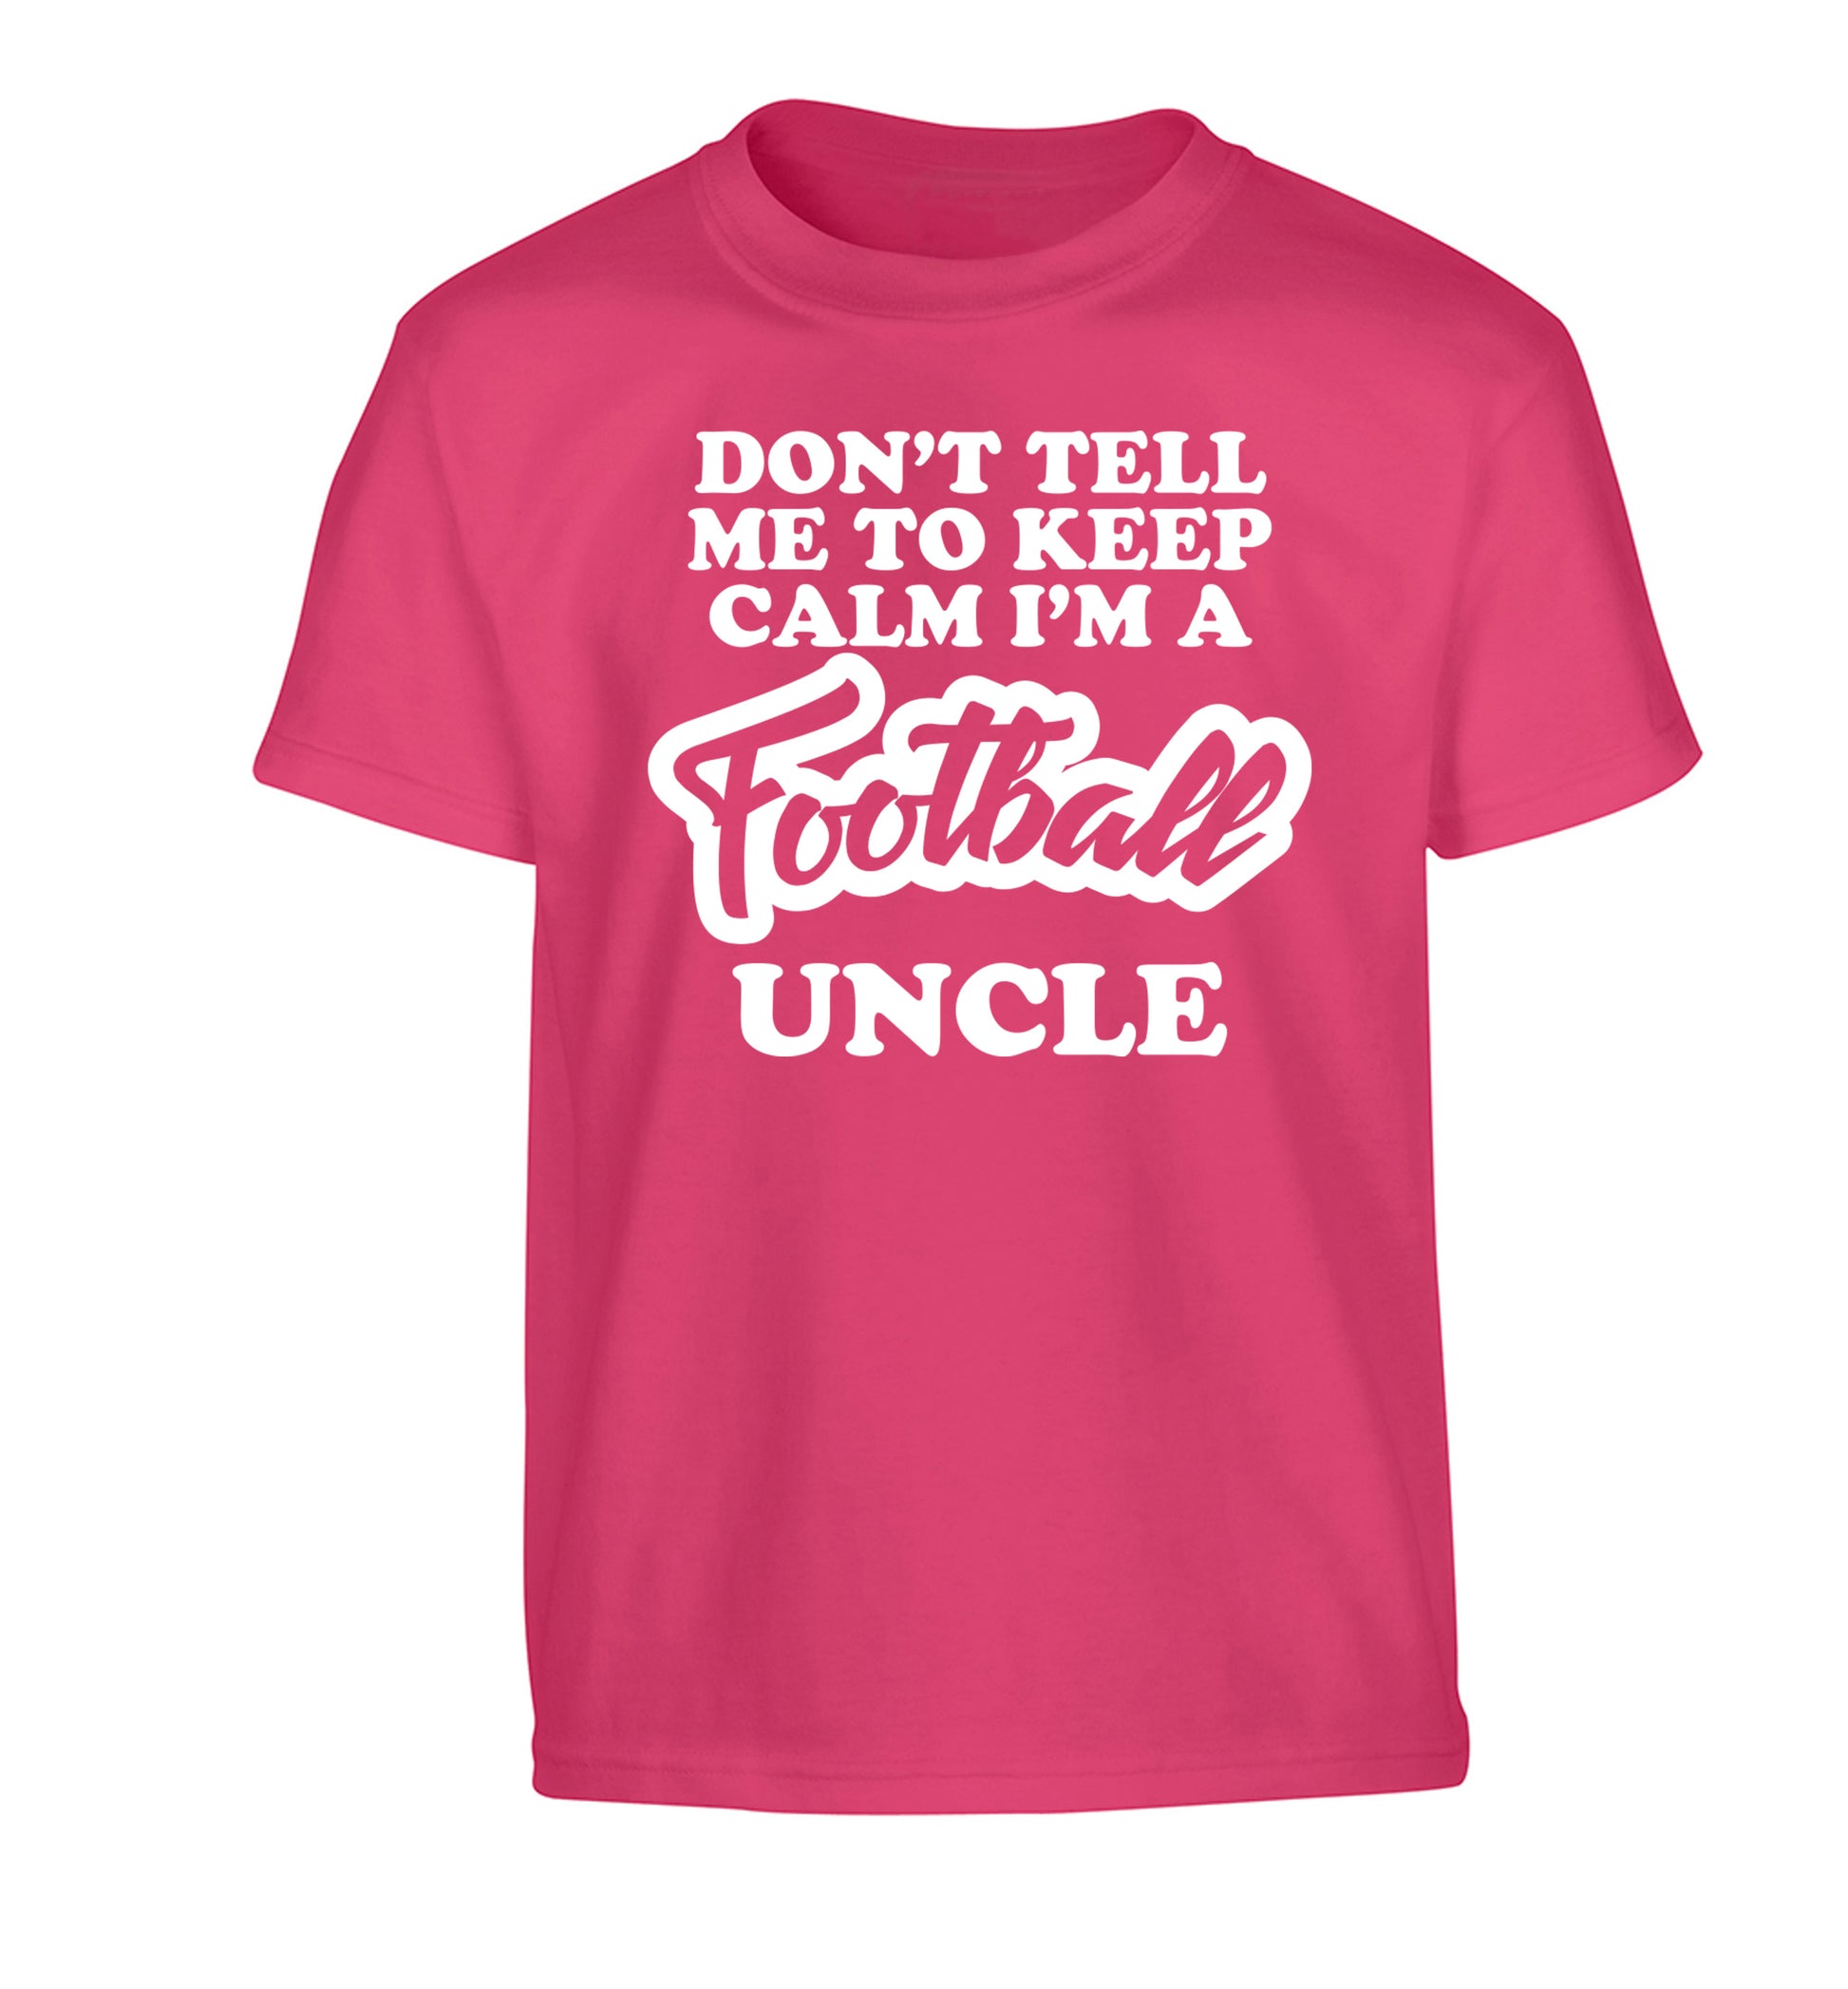 Don't tell me to keep calm I'm a football uncle Children's pink Tshirt 12-14 Years